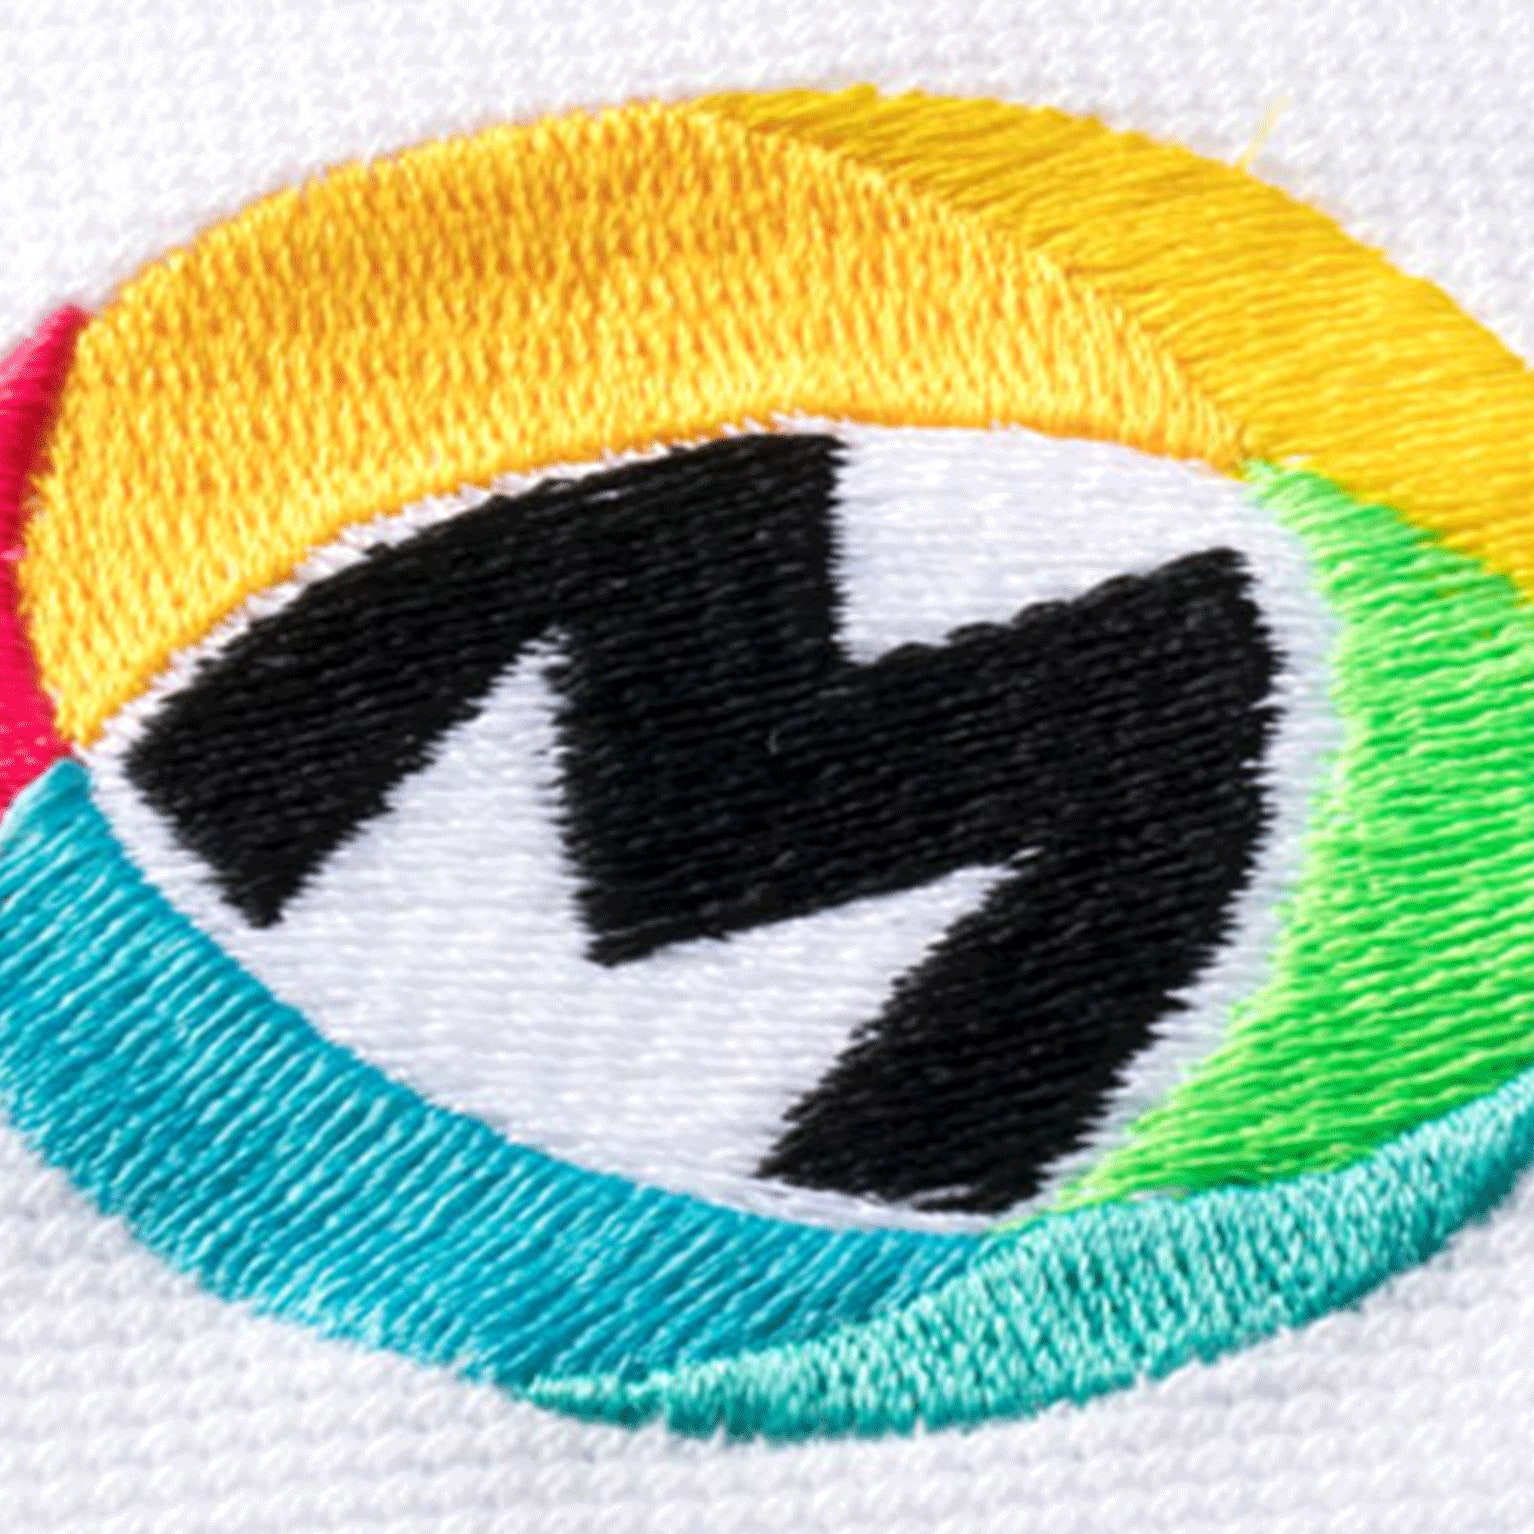 T shirt embroidery